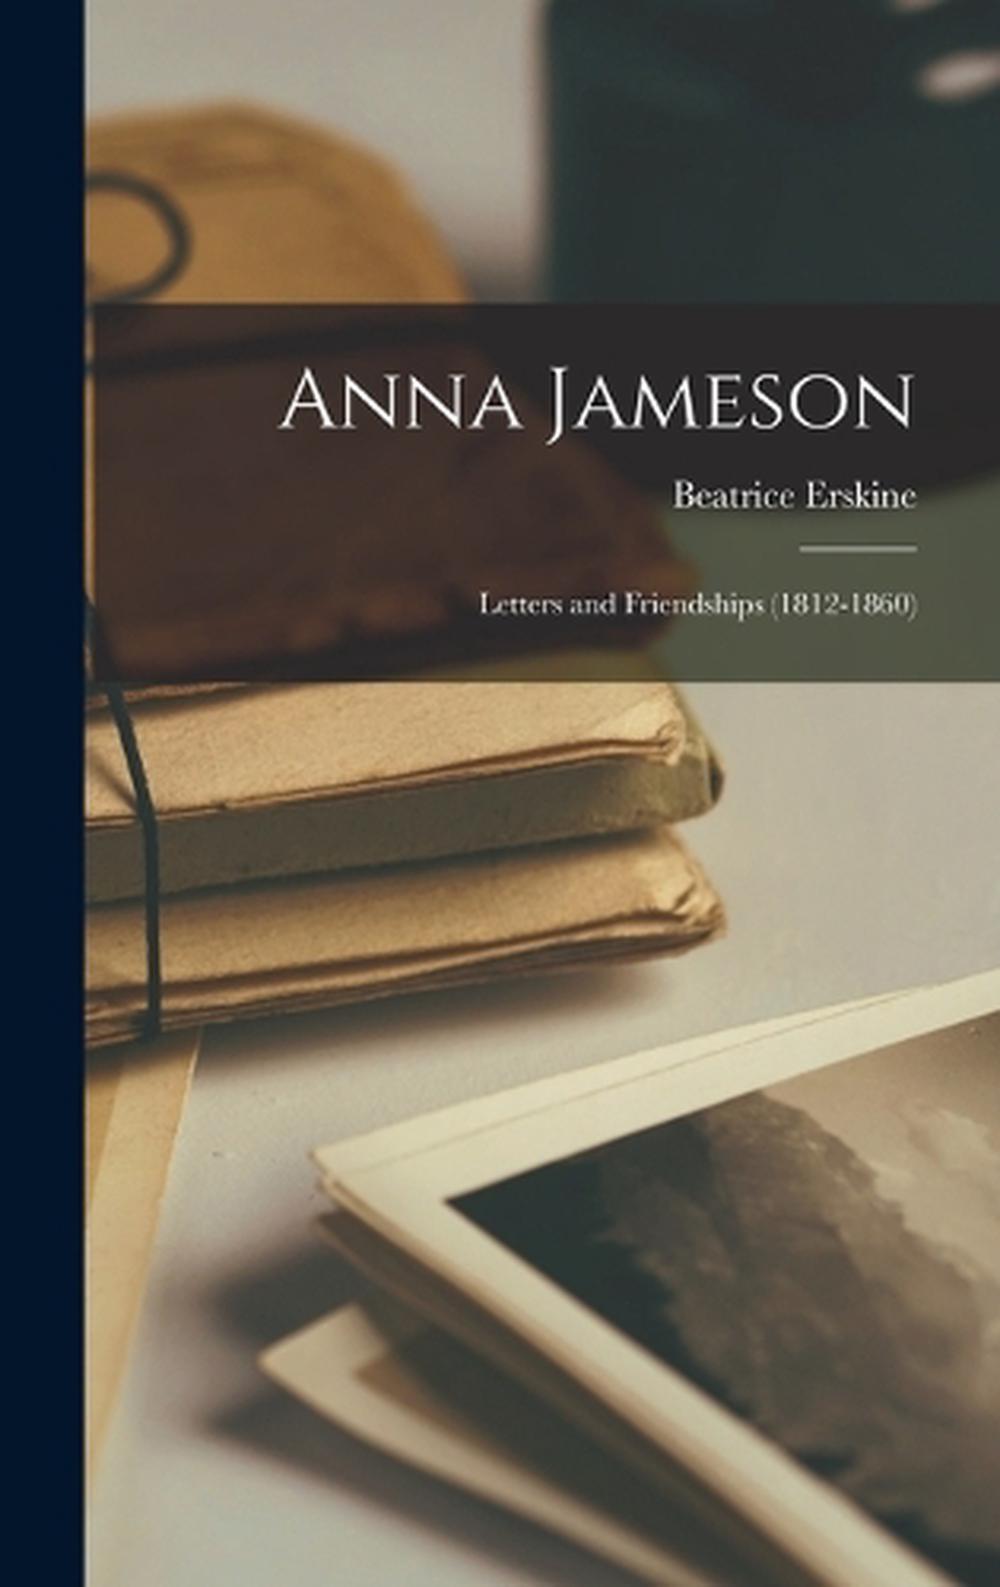 Anna Jameson: Letters and Friendships (1812-1860) by 1794-1860 Jameson (English)